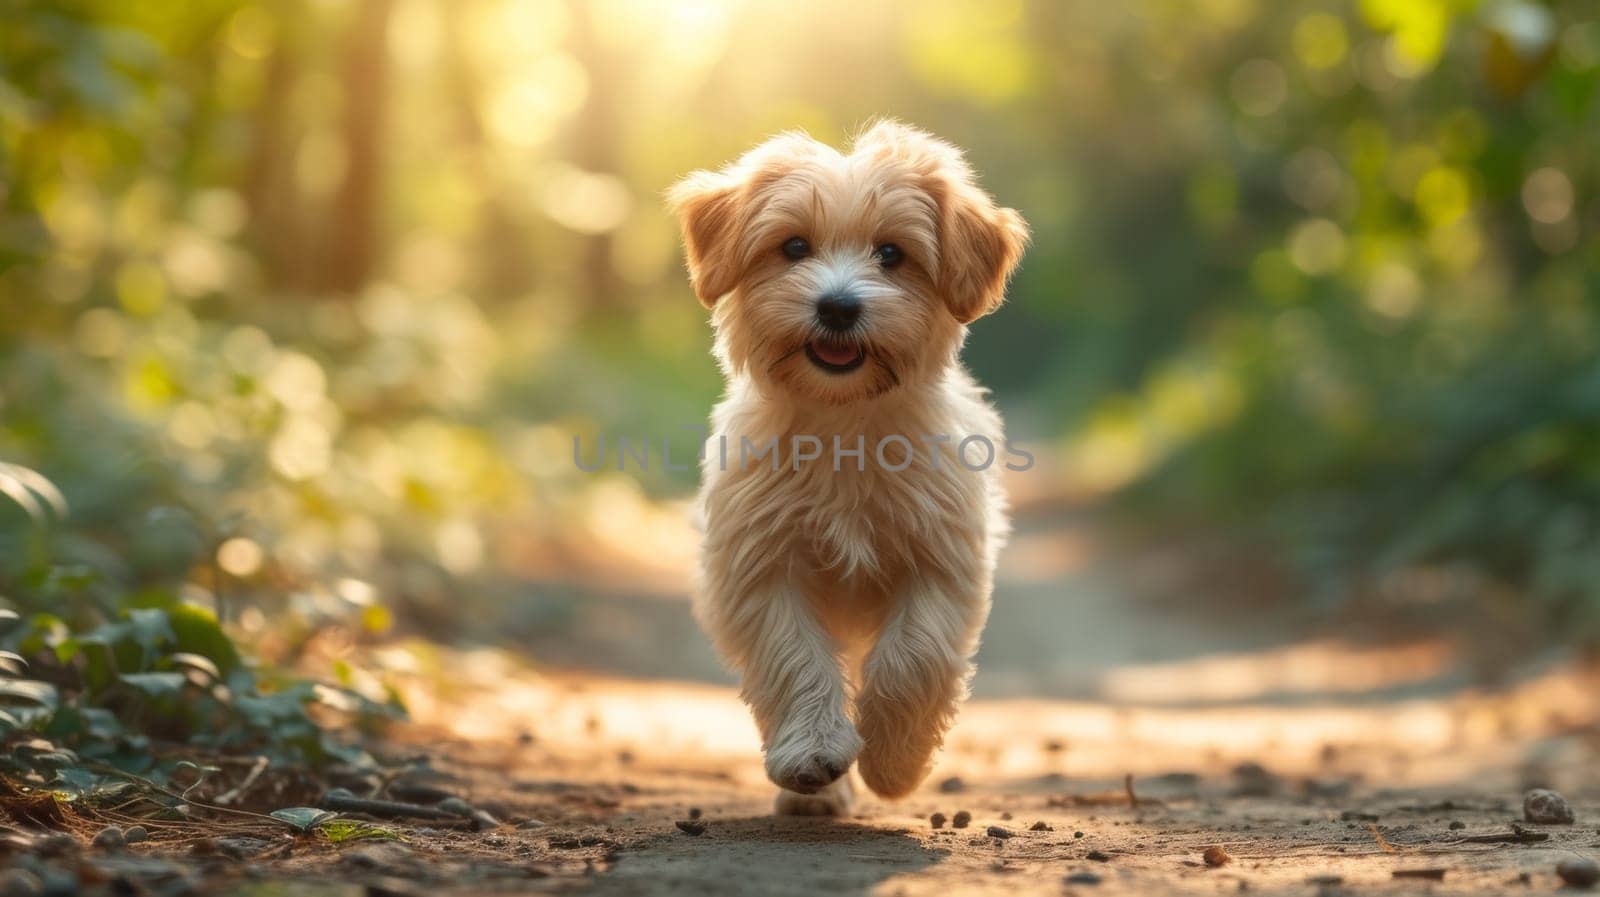 A small dog running on a dirt road in the woods, AI by starush